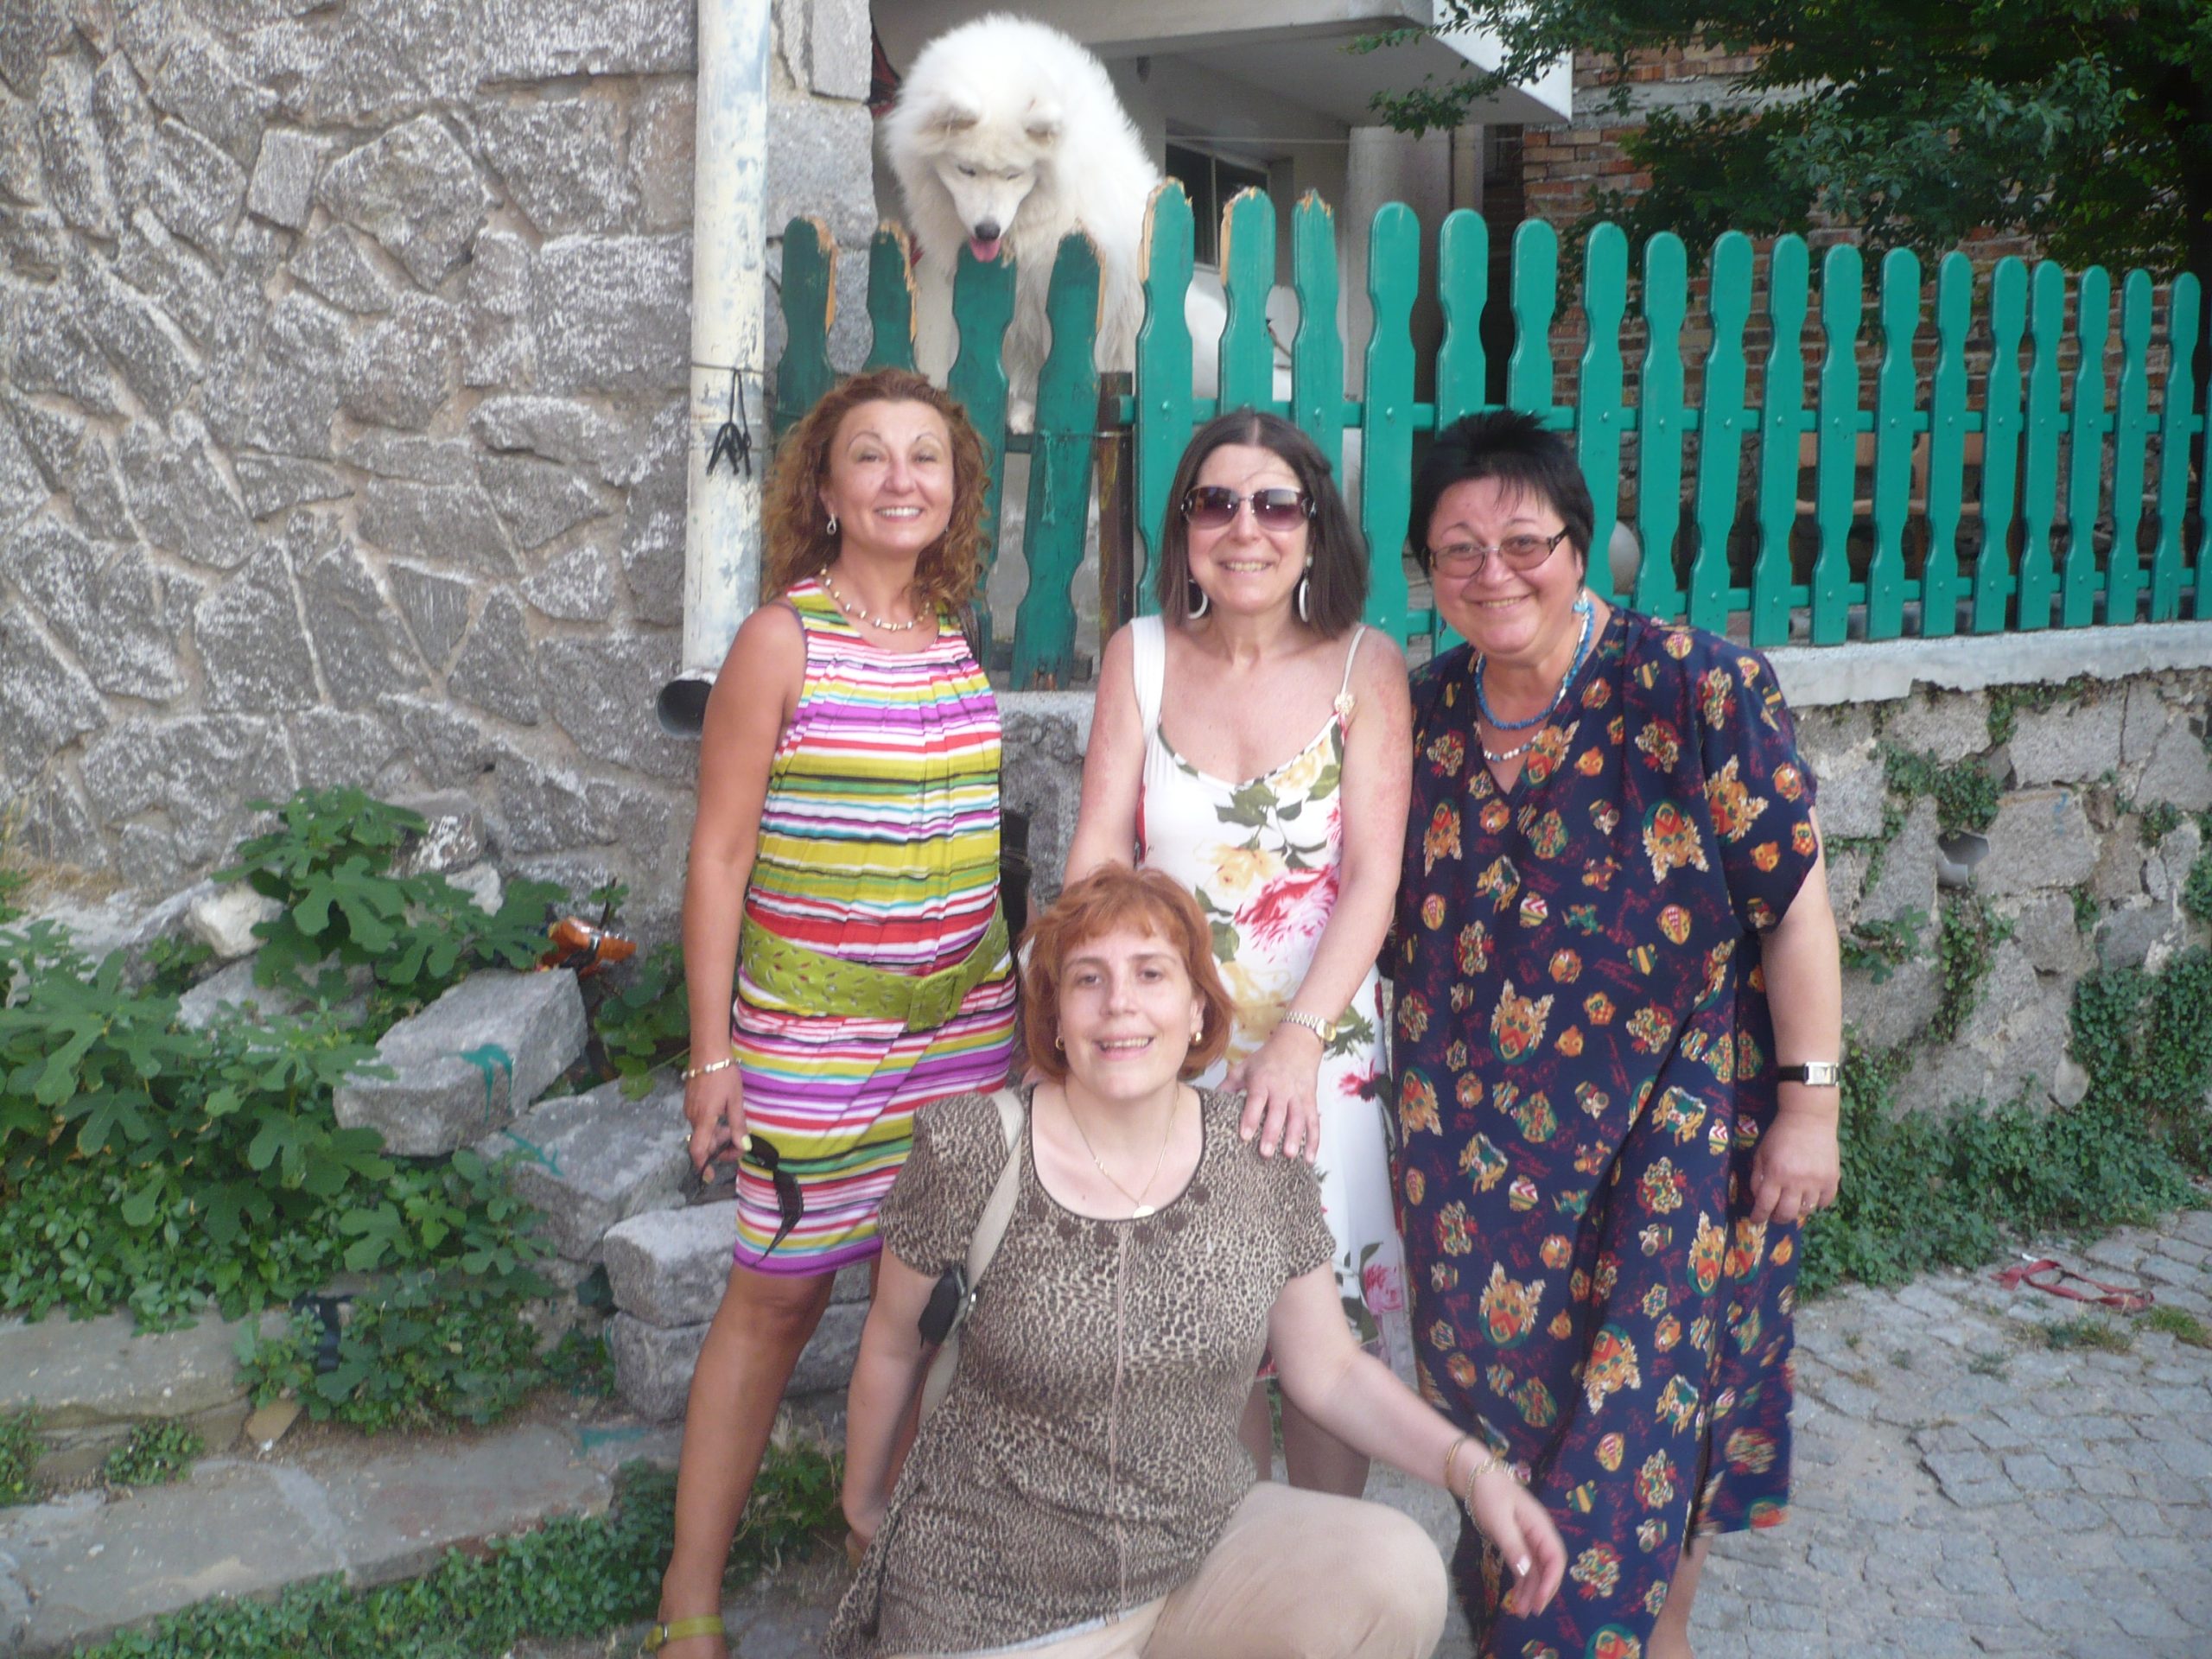 With Mrs. M. Dukanova - director of the National School of Arts - Ruse, Bulgaria, Maria Prinz and Blagovesta Ryadkova - chairwoman of Association Friends of Austria in Burgas